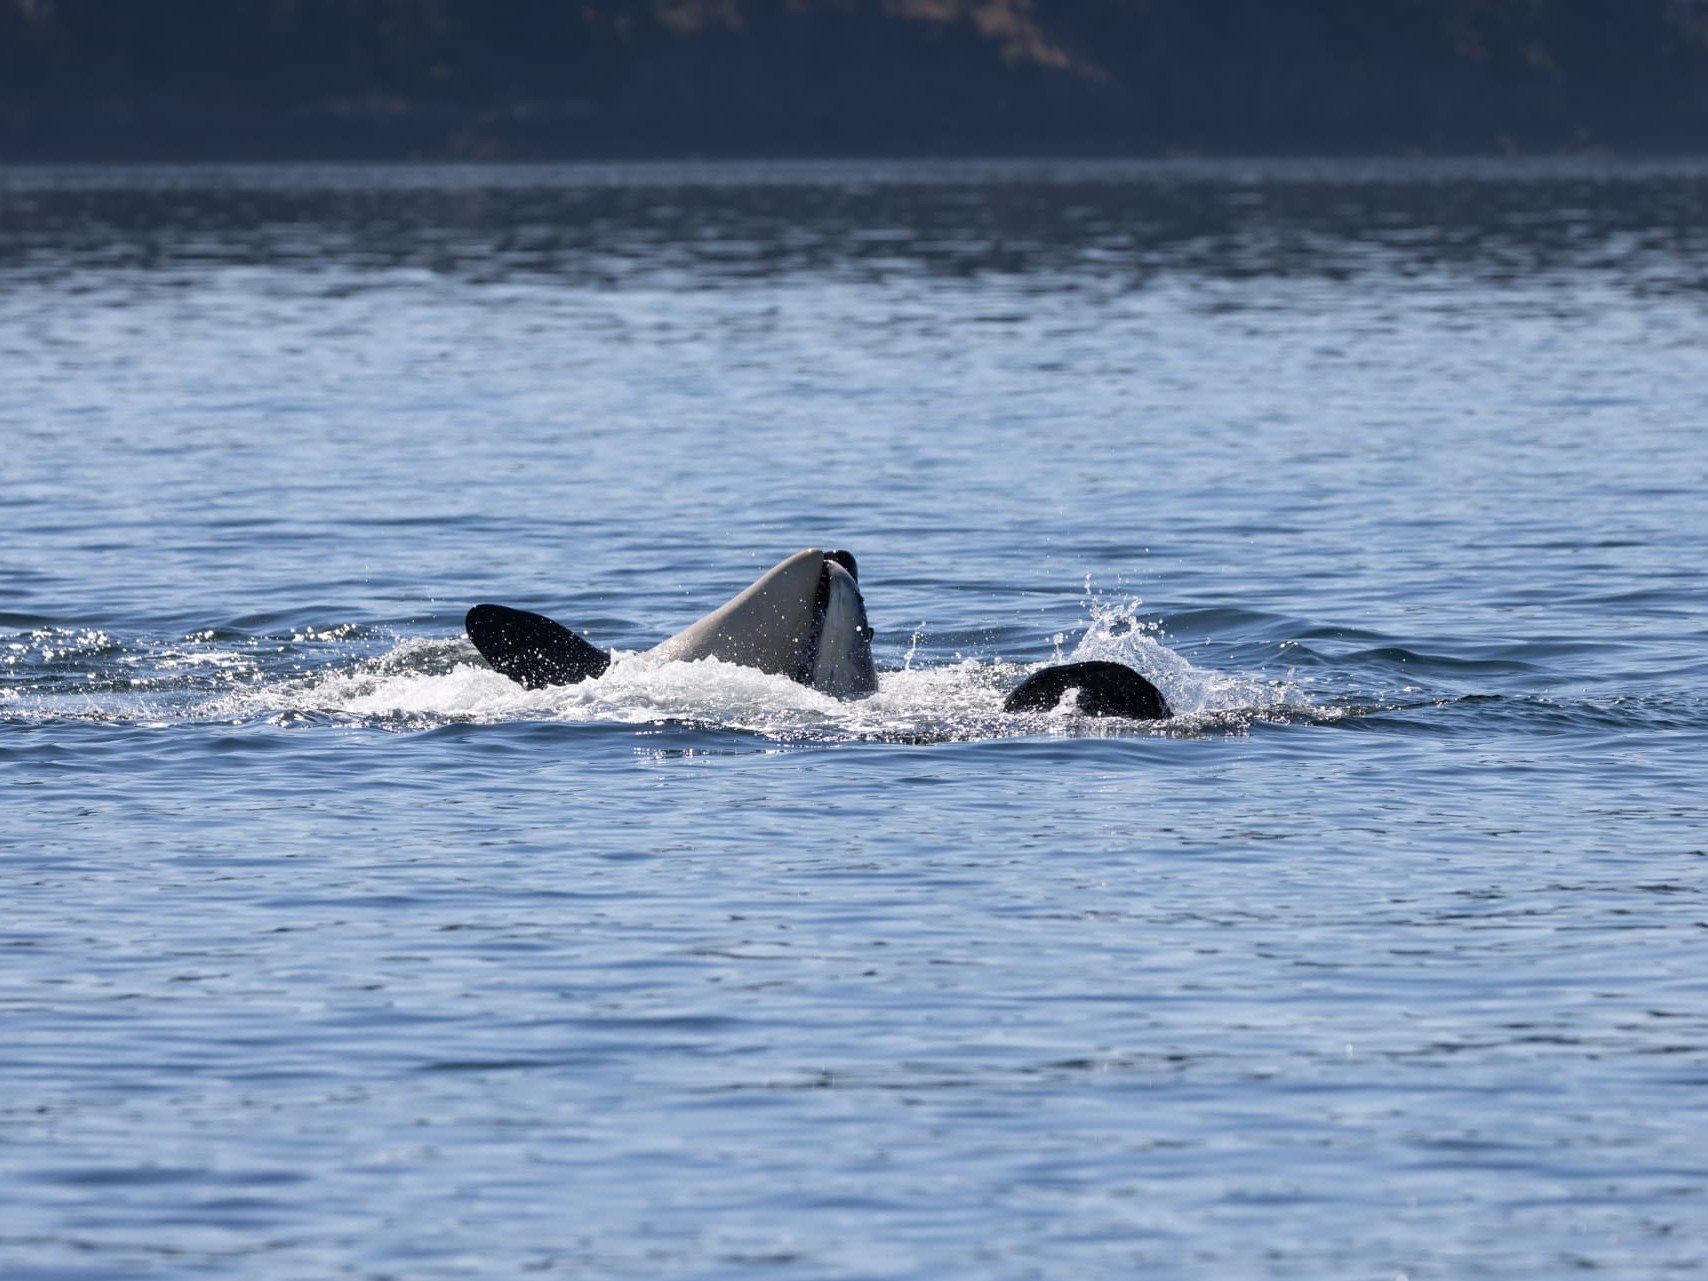 A Southern Resident killer whales holds a harbor porpoise in it's mouth.